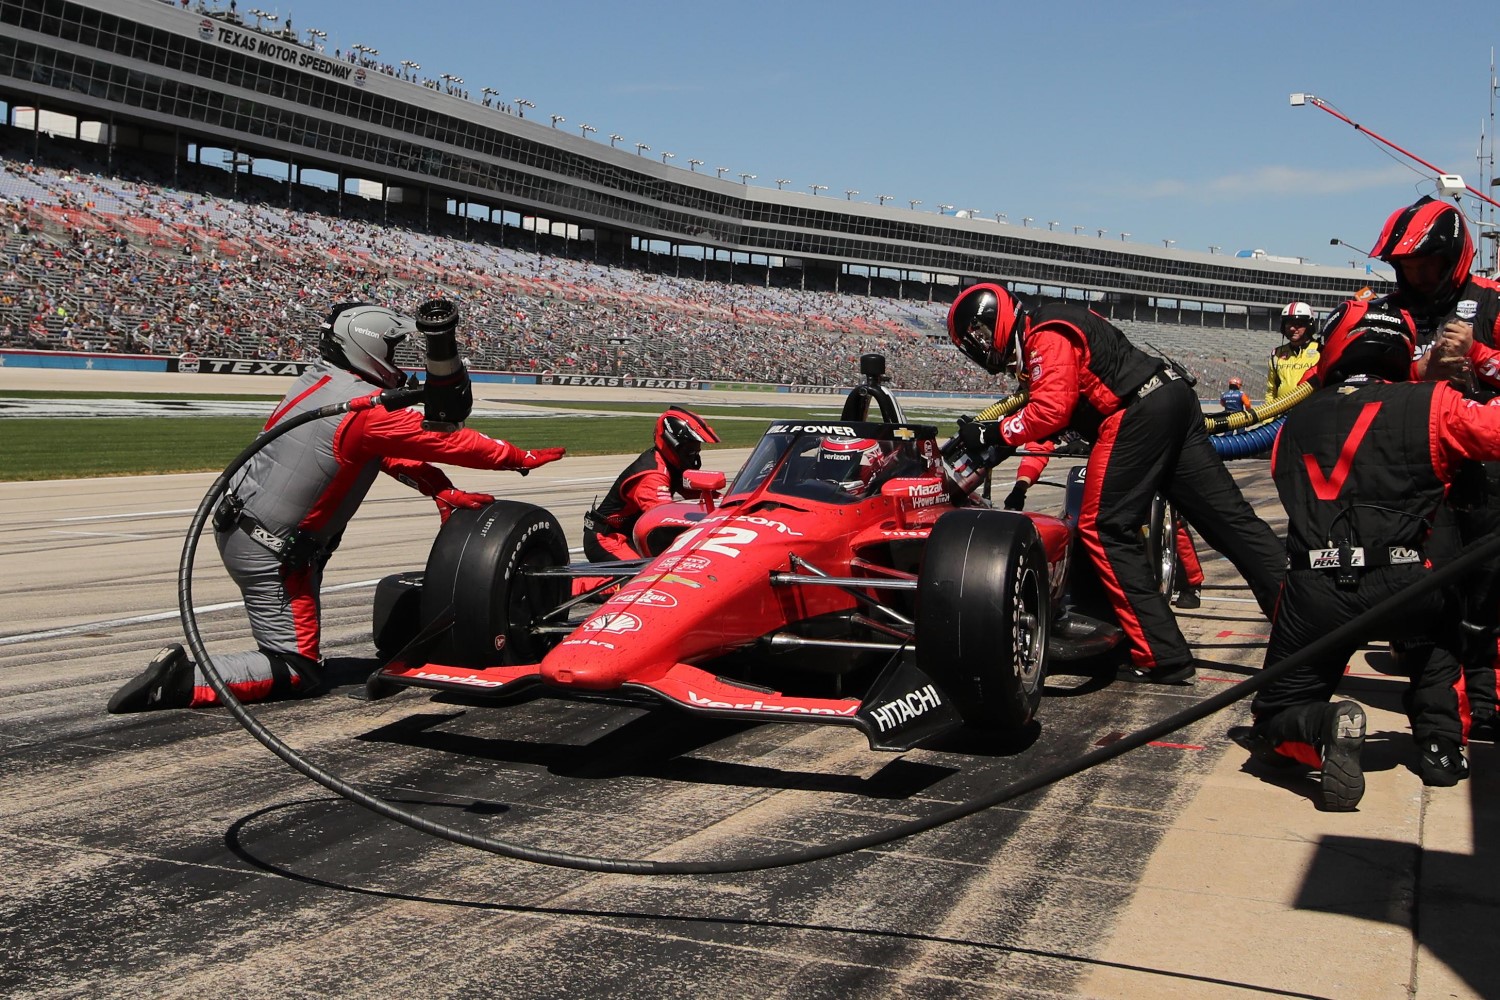 Will Power gets service during the Xpel 375 at Texas Motor Speedway. Media Credit: Penske Entertainment